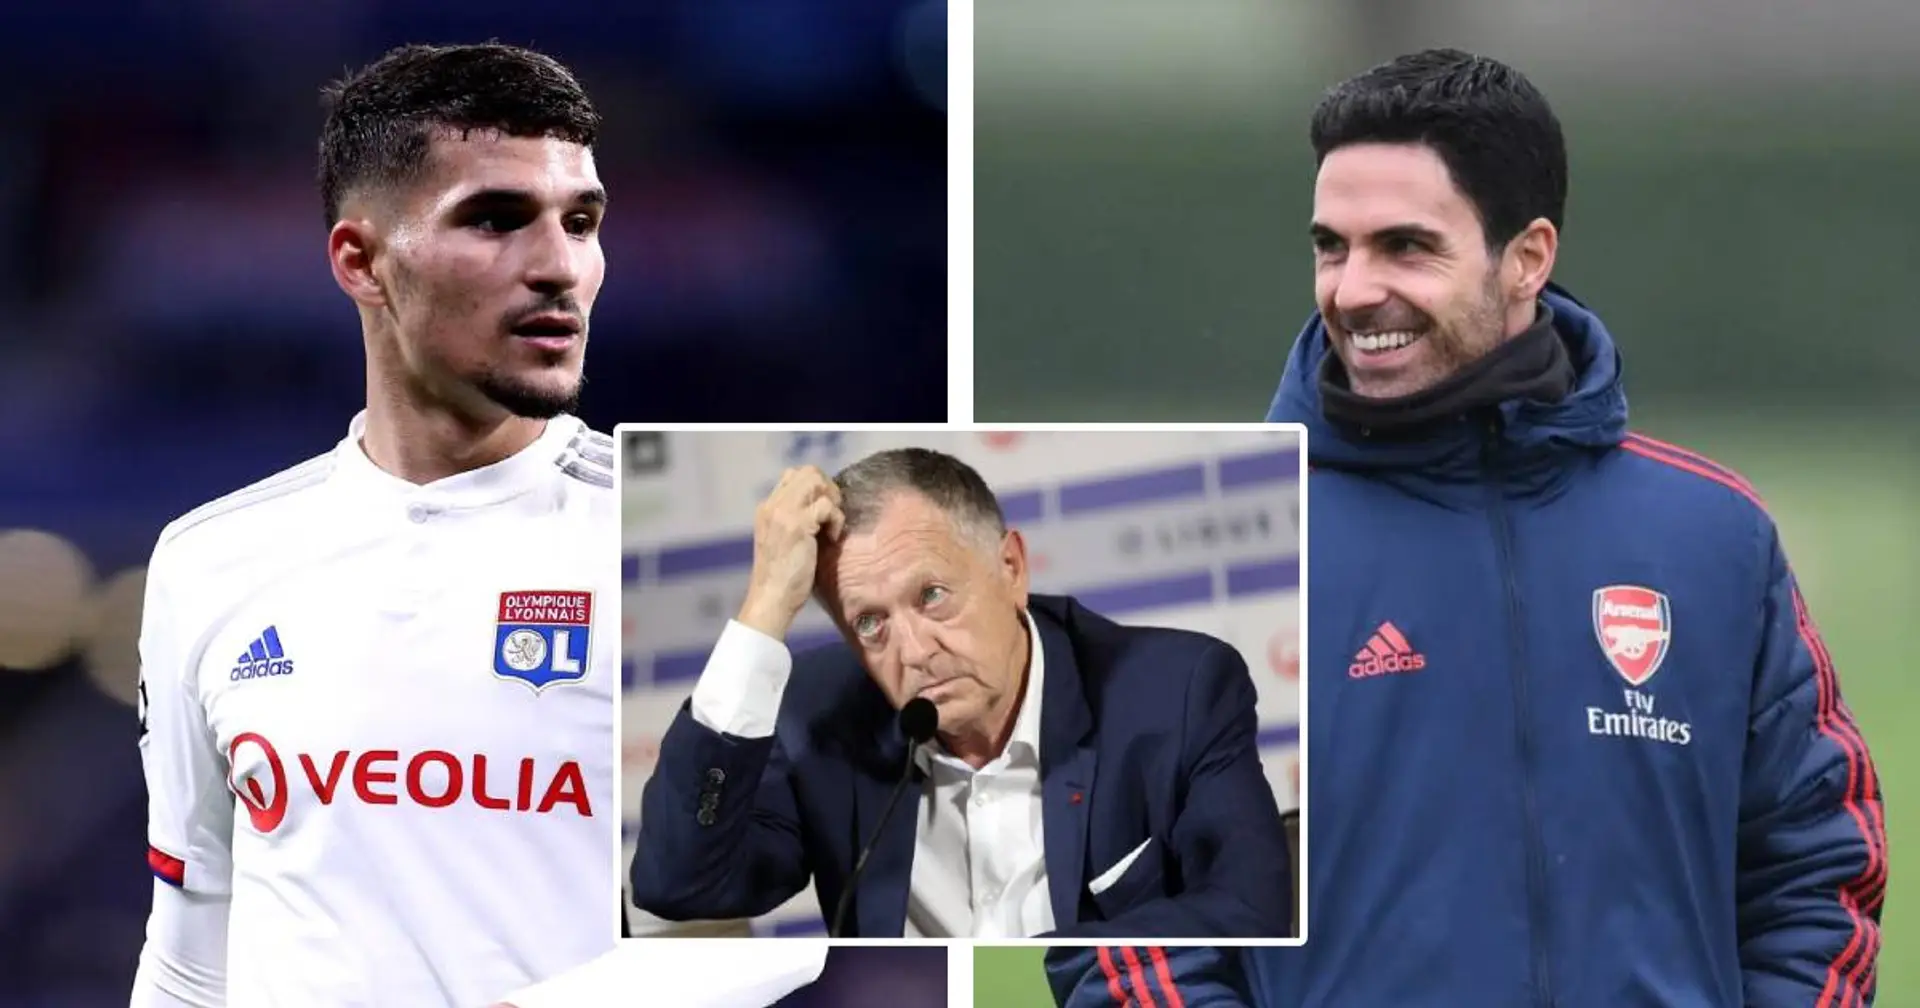 Aouar will be allowed to leave for €30m this summer (reliability: 4 stars)